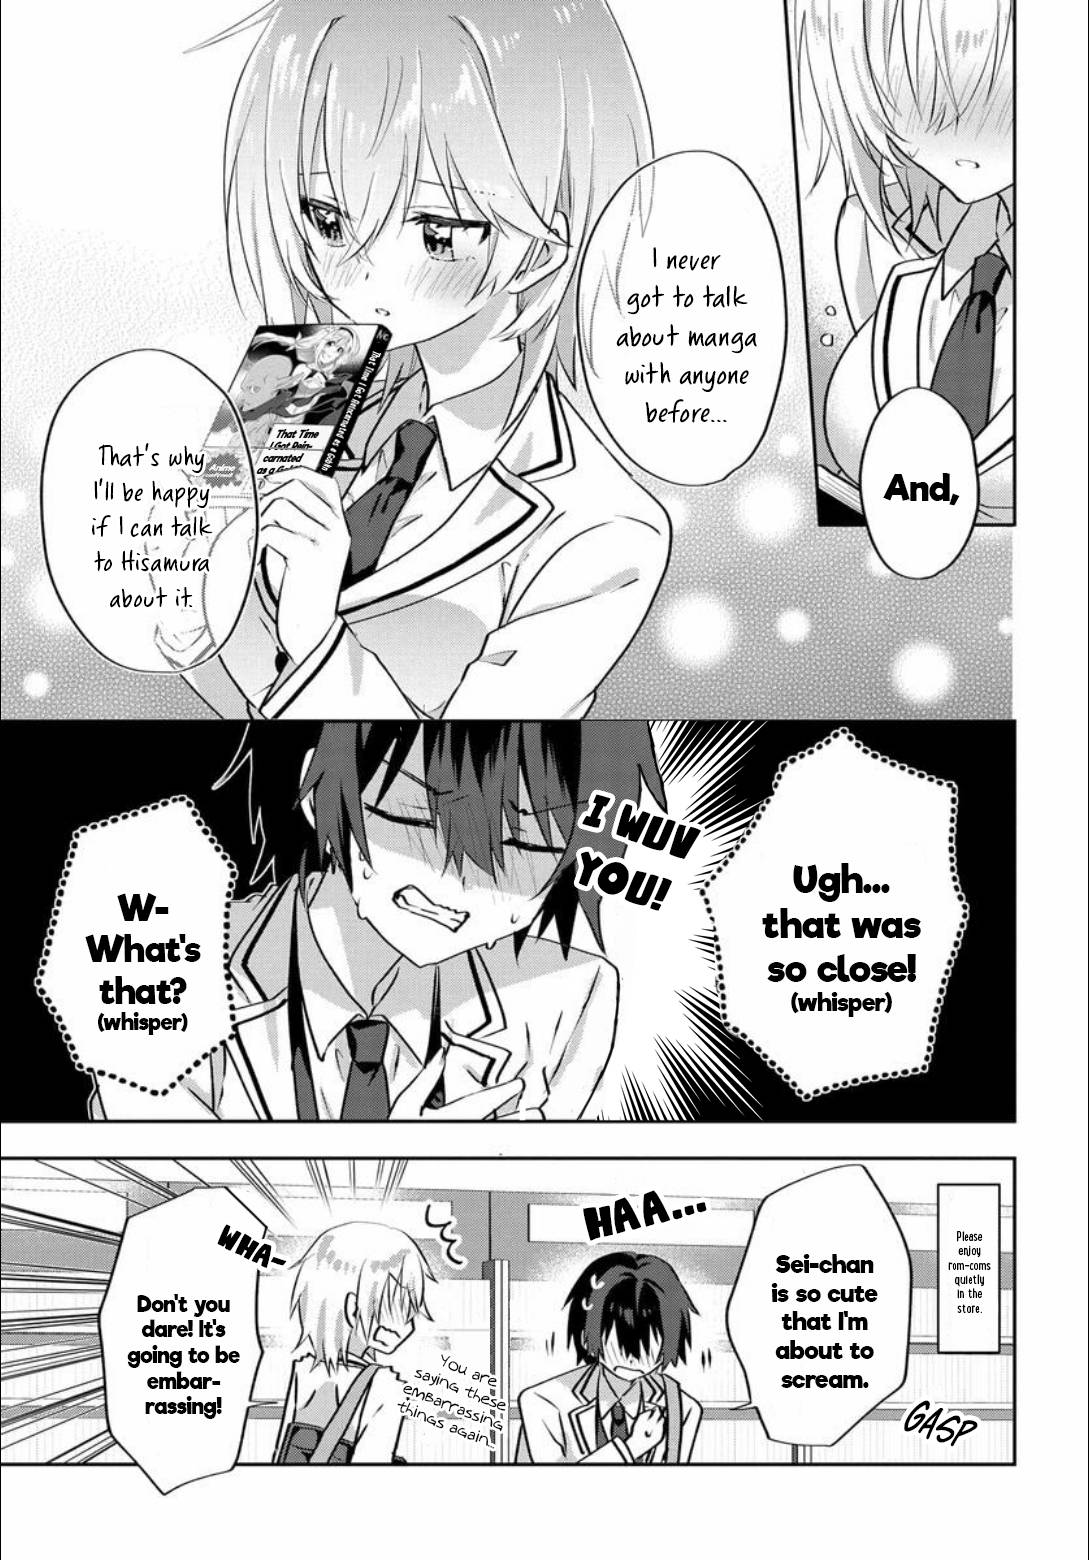 Since I’Ve Entered The World Of Romantic Comedy Manga, I’Ll Do My Best To Make The Losing Heroine Happy - chapter 5.1 - #5